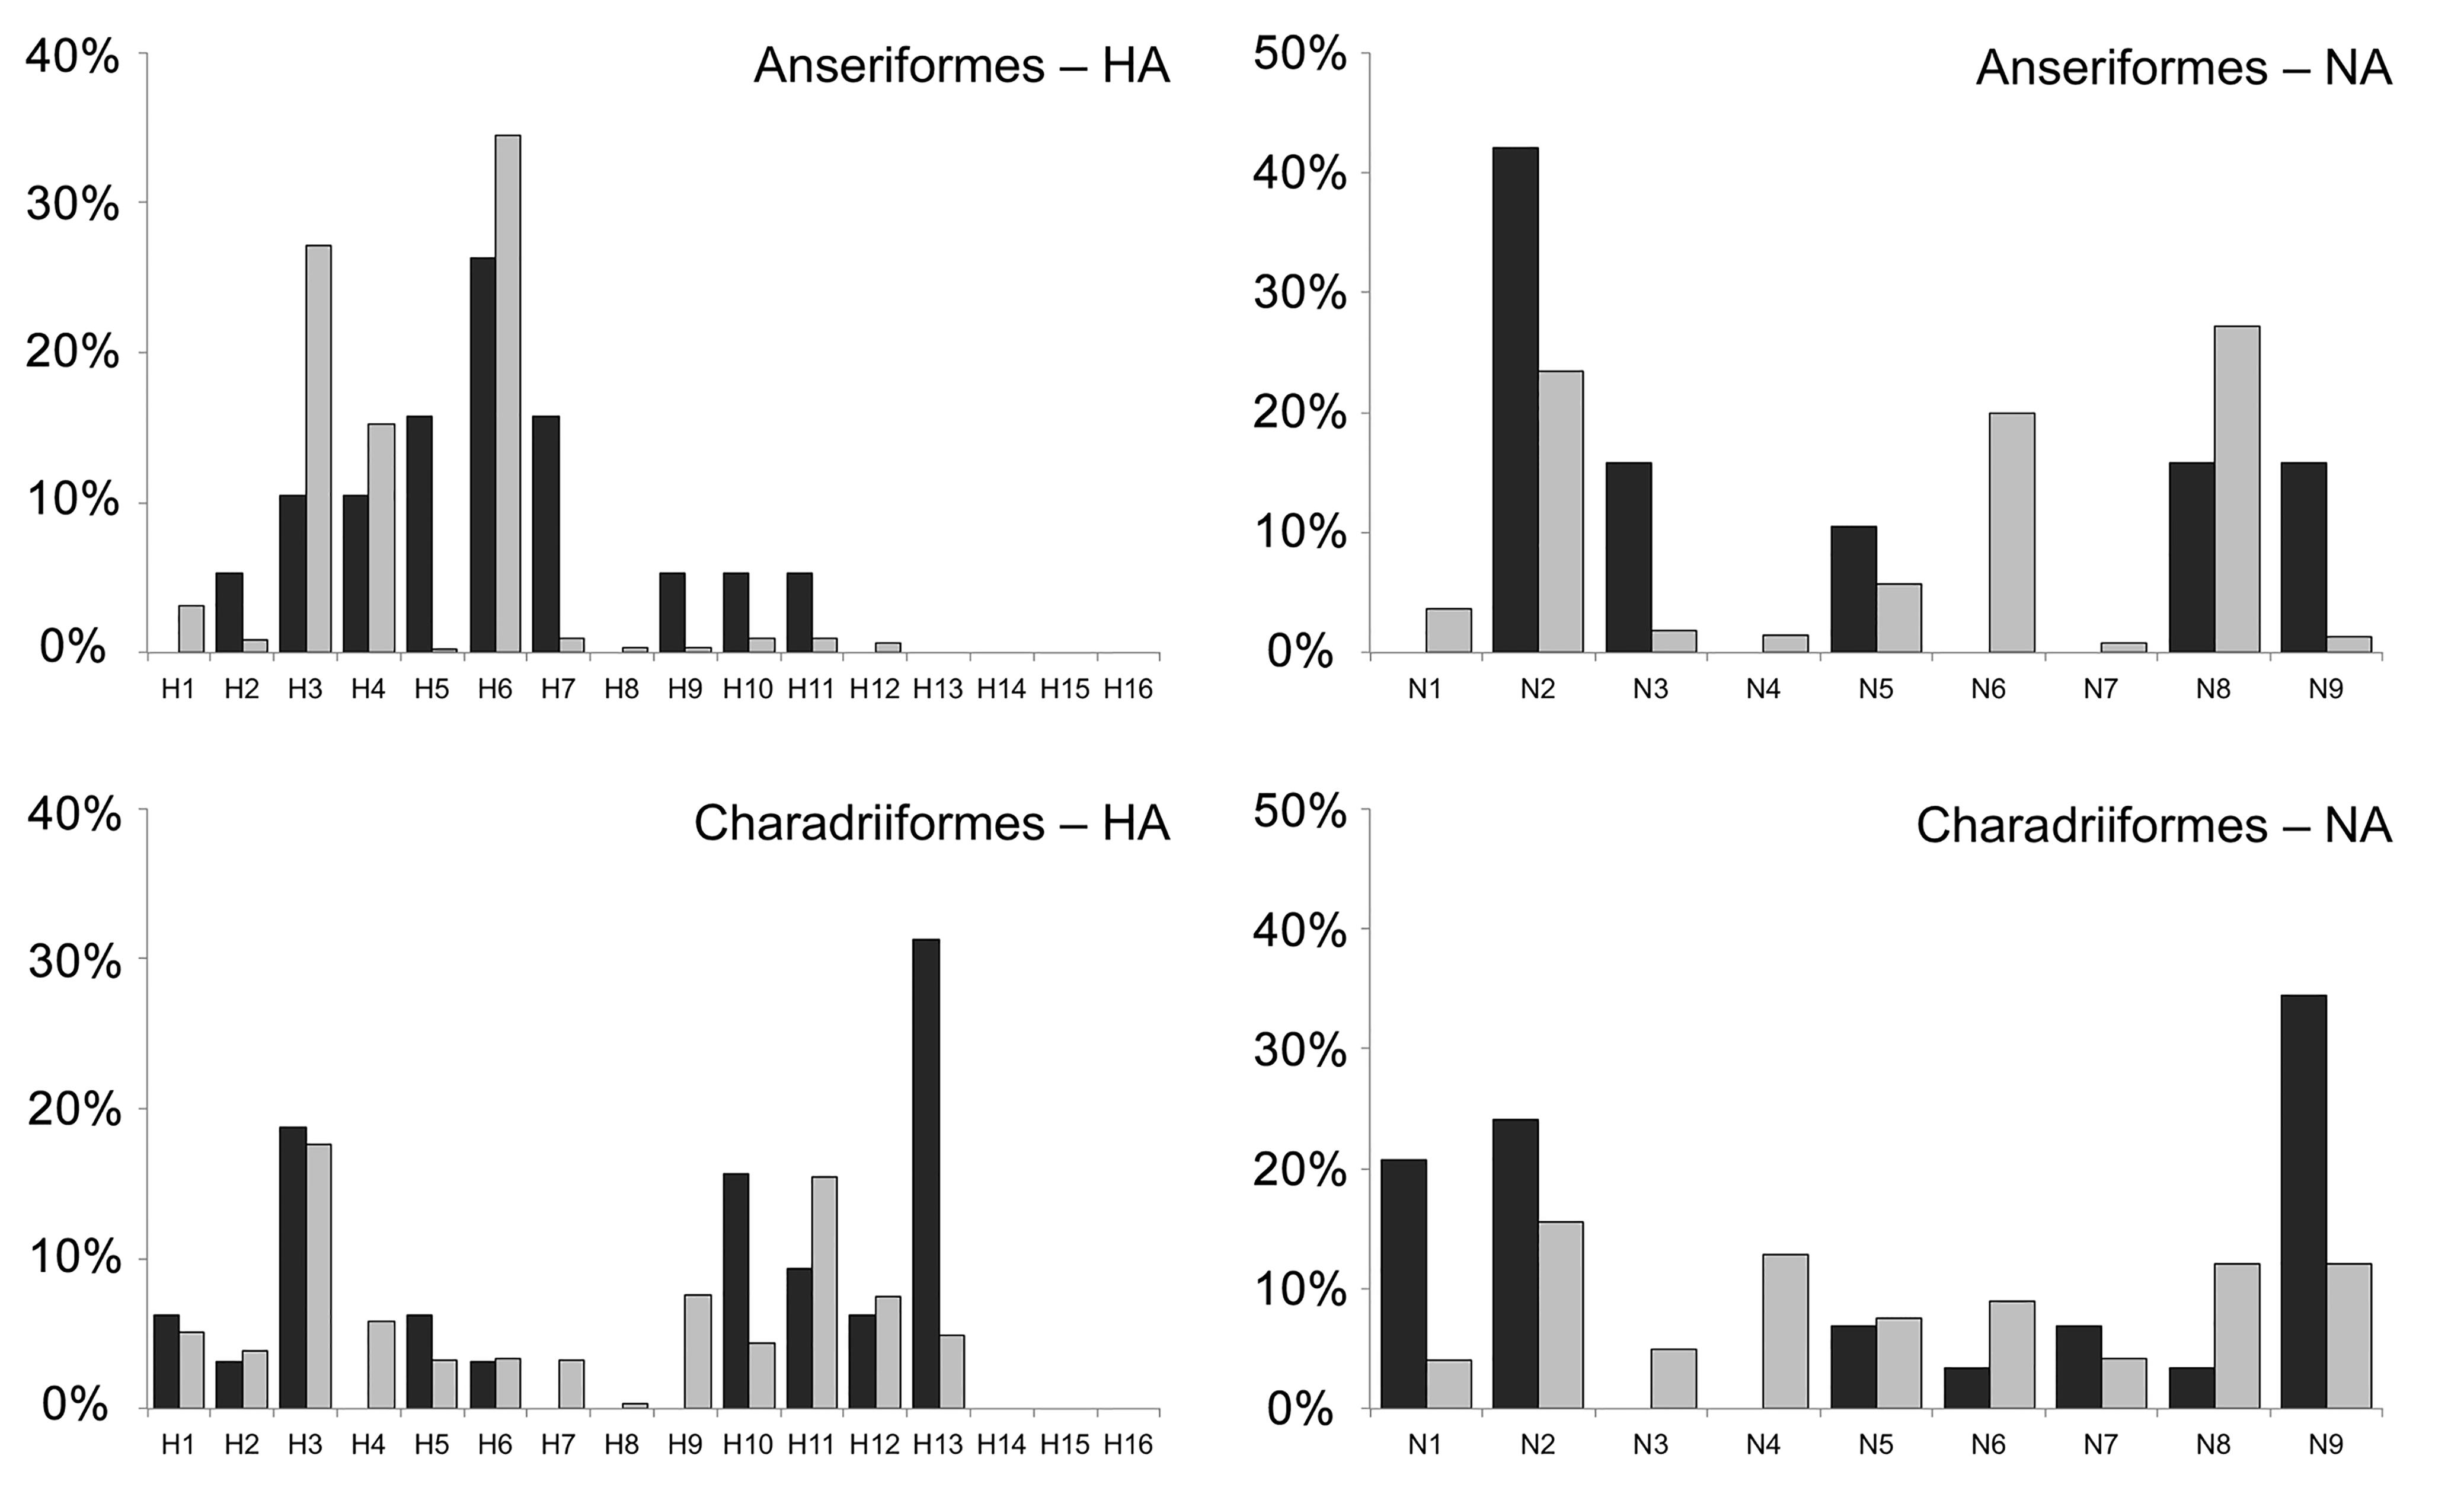 Distribution of published AIV strains retrieved from wild Anseriformes and Charadriiformes in South America from 2006 to 2016, in relation to the subtypes of hemagglutinin (HA) and neuraminidase (NA).